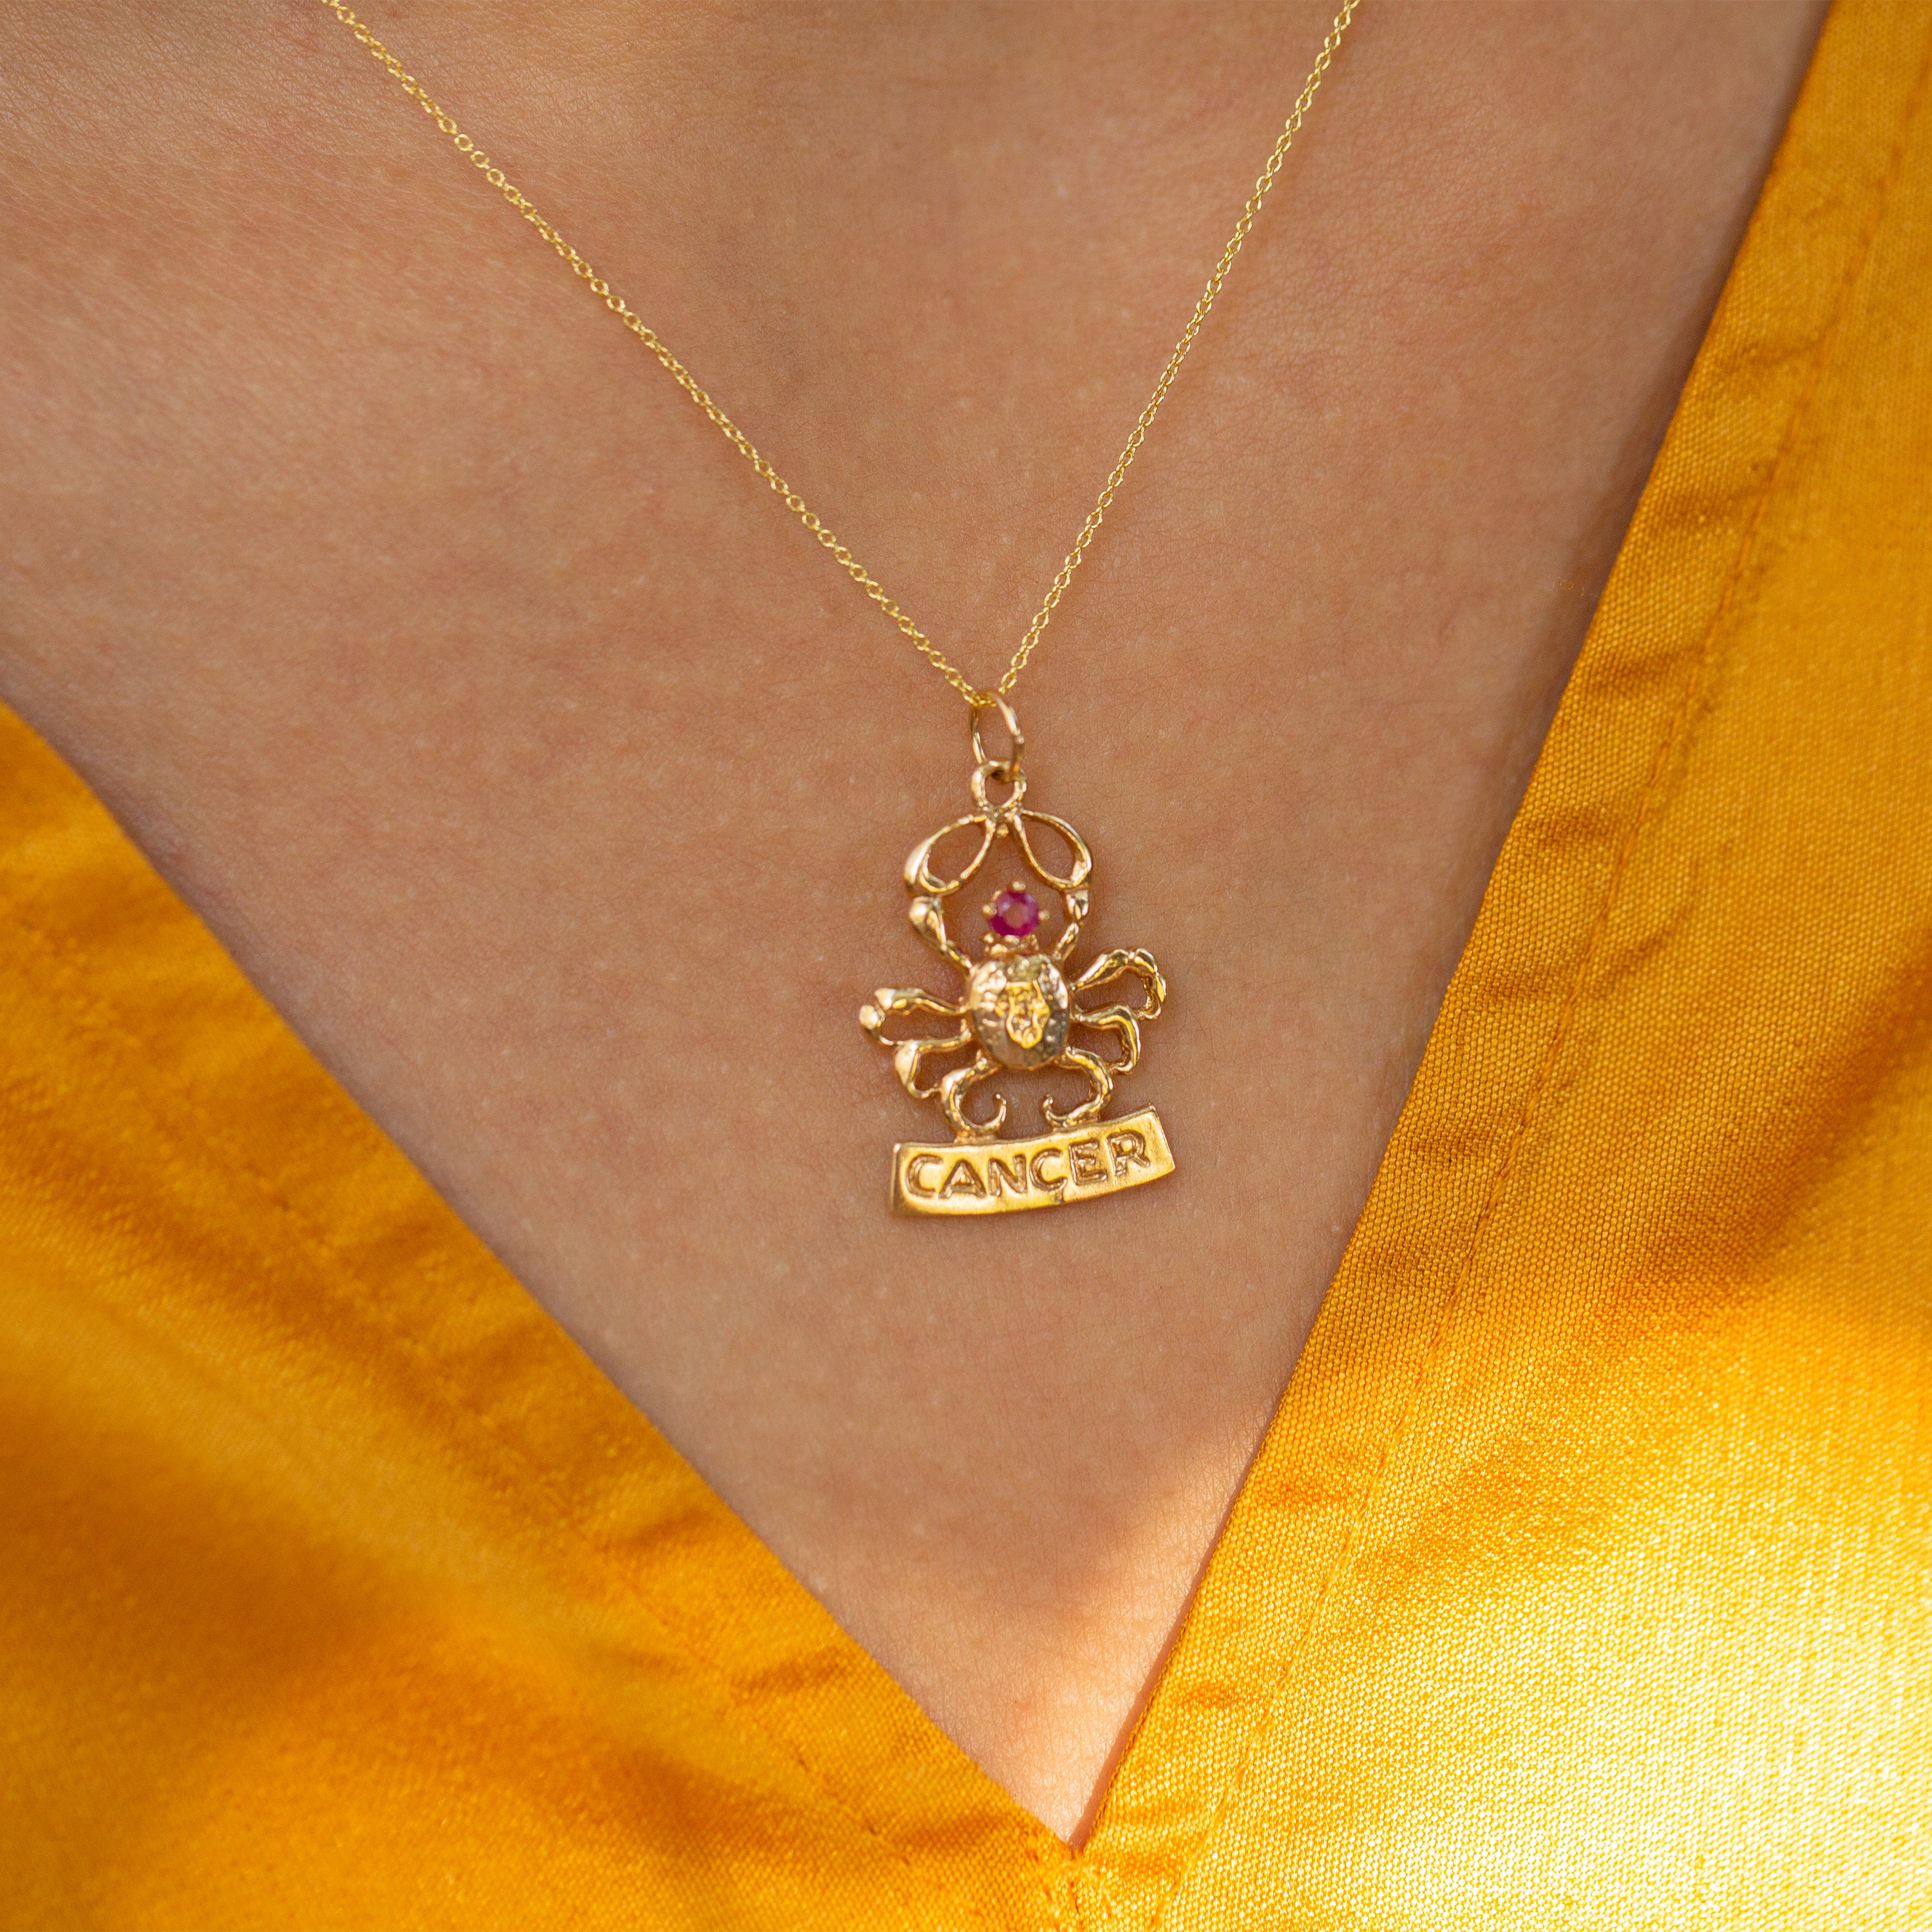 Cancer Ruby and 10k Gold Zodiac Charm